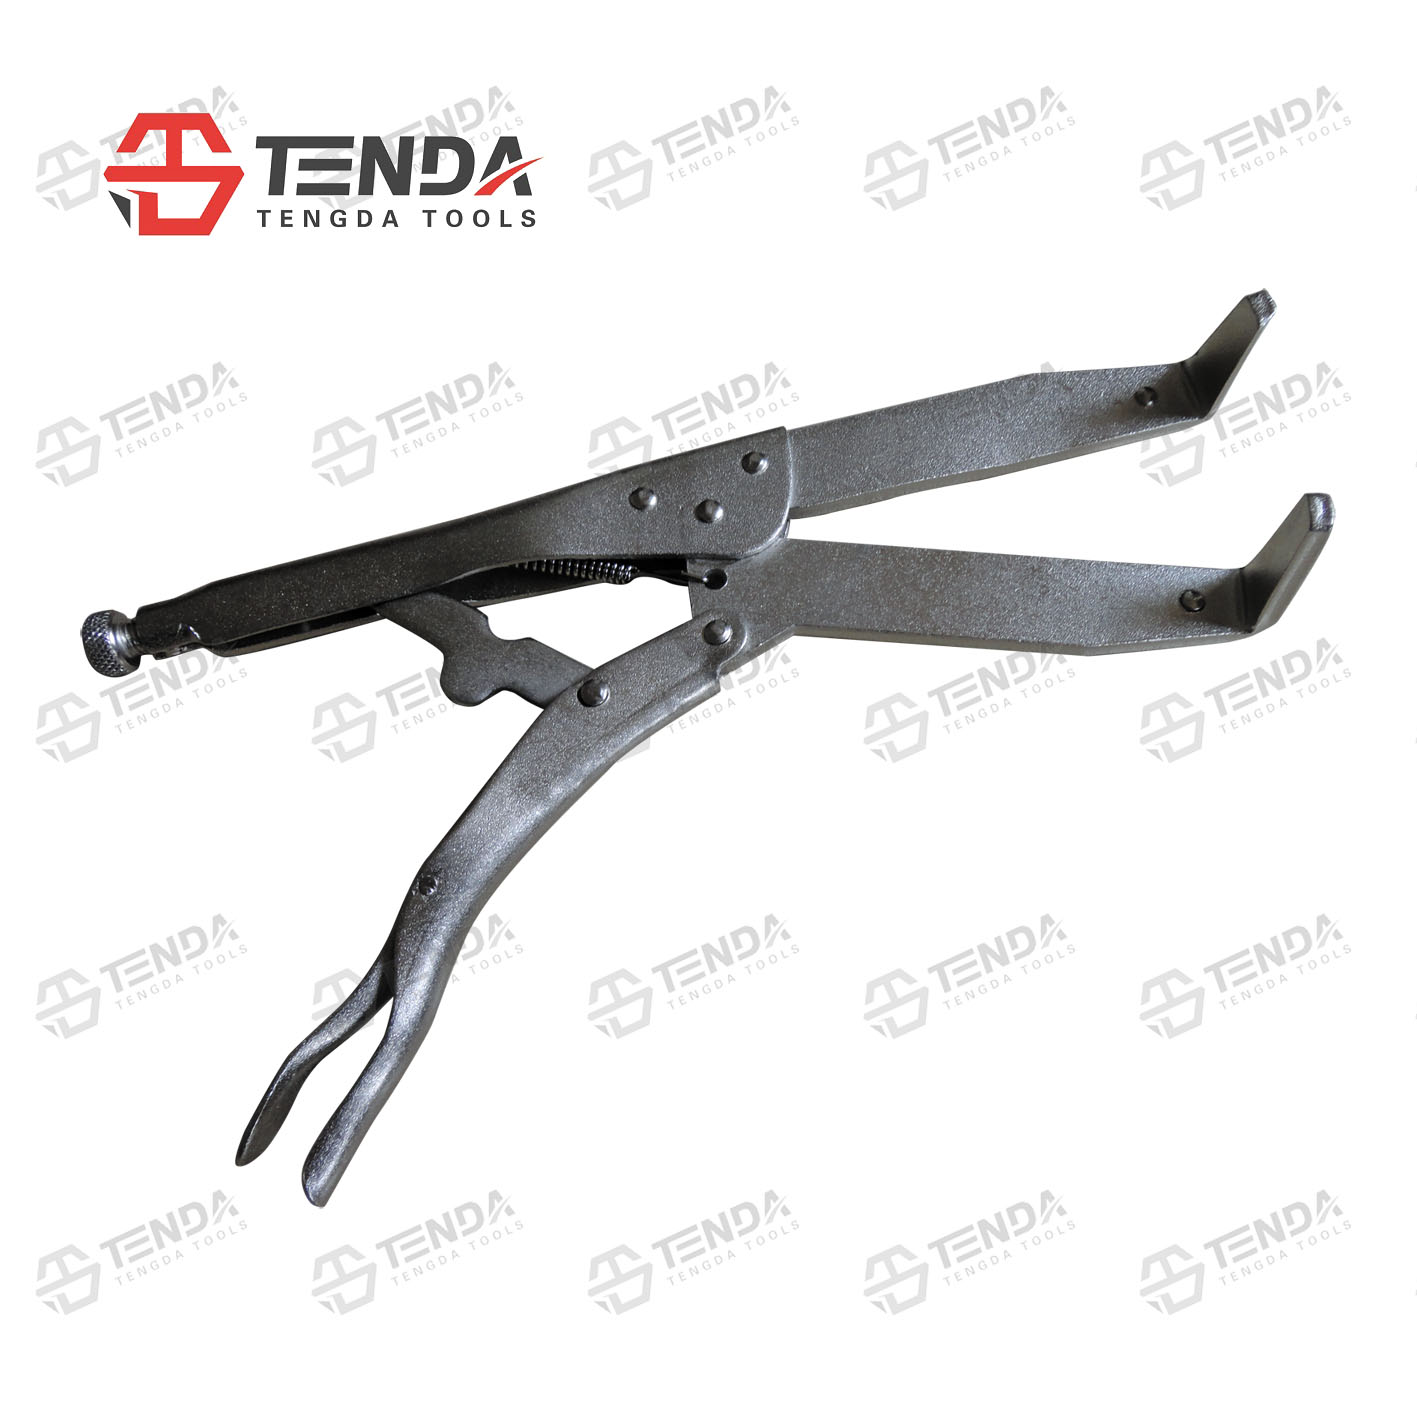 TD-068 Clutch Holding Tool